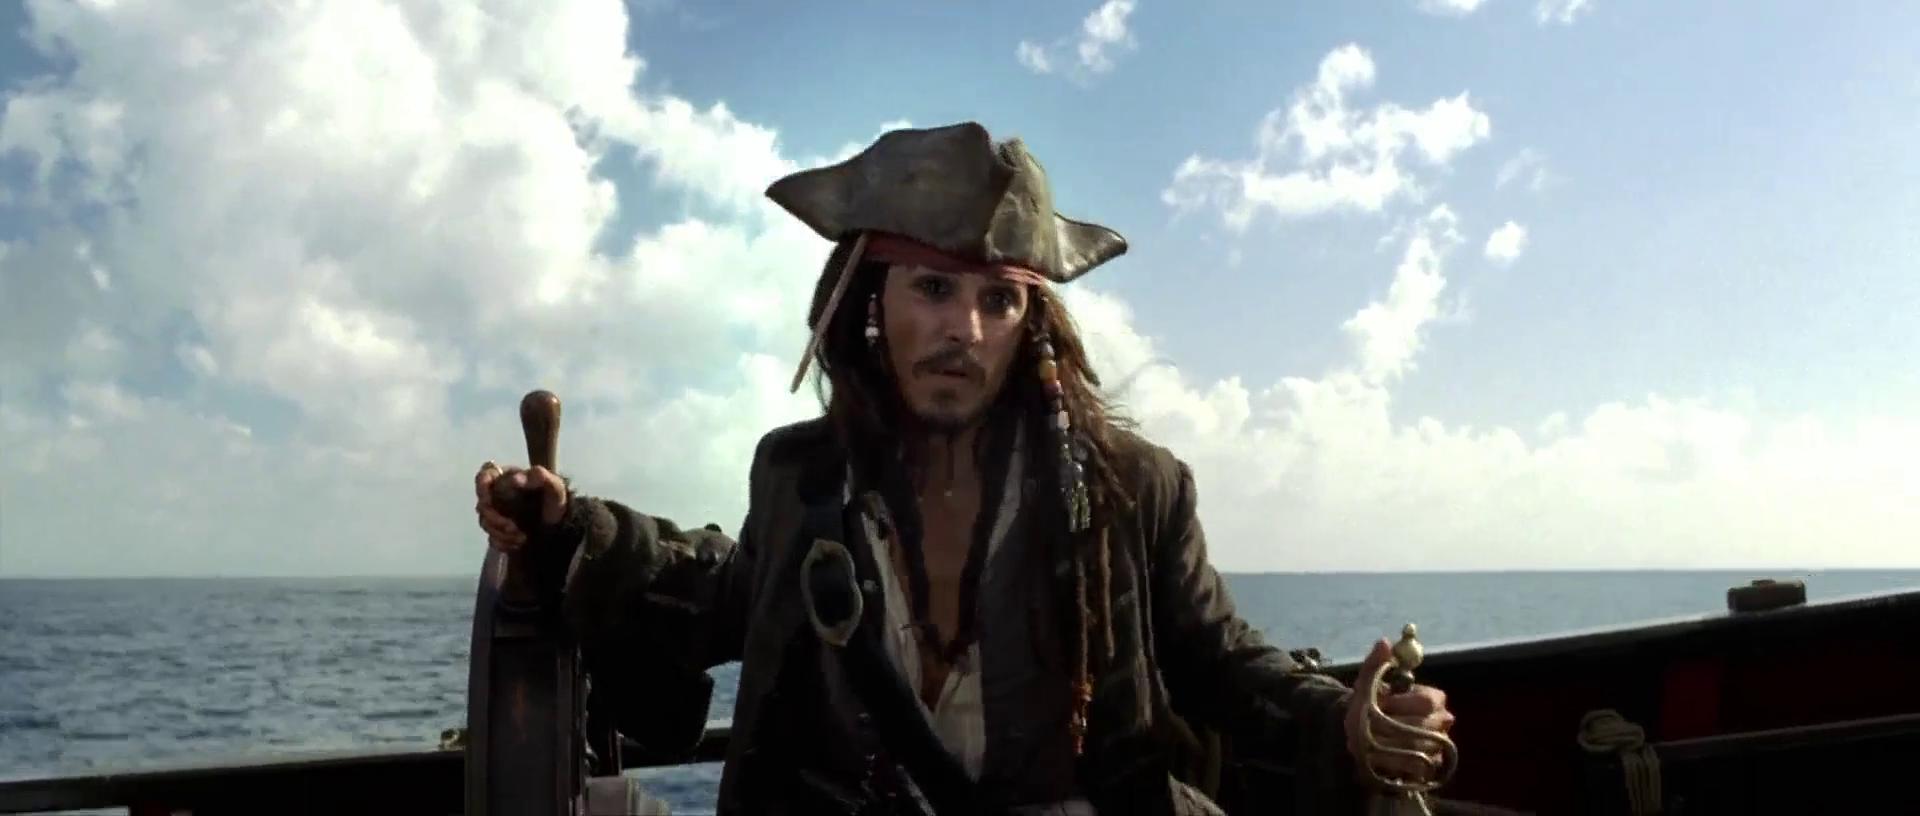 how to watch pirates of the caribbean 2 online free